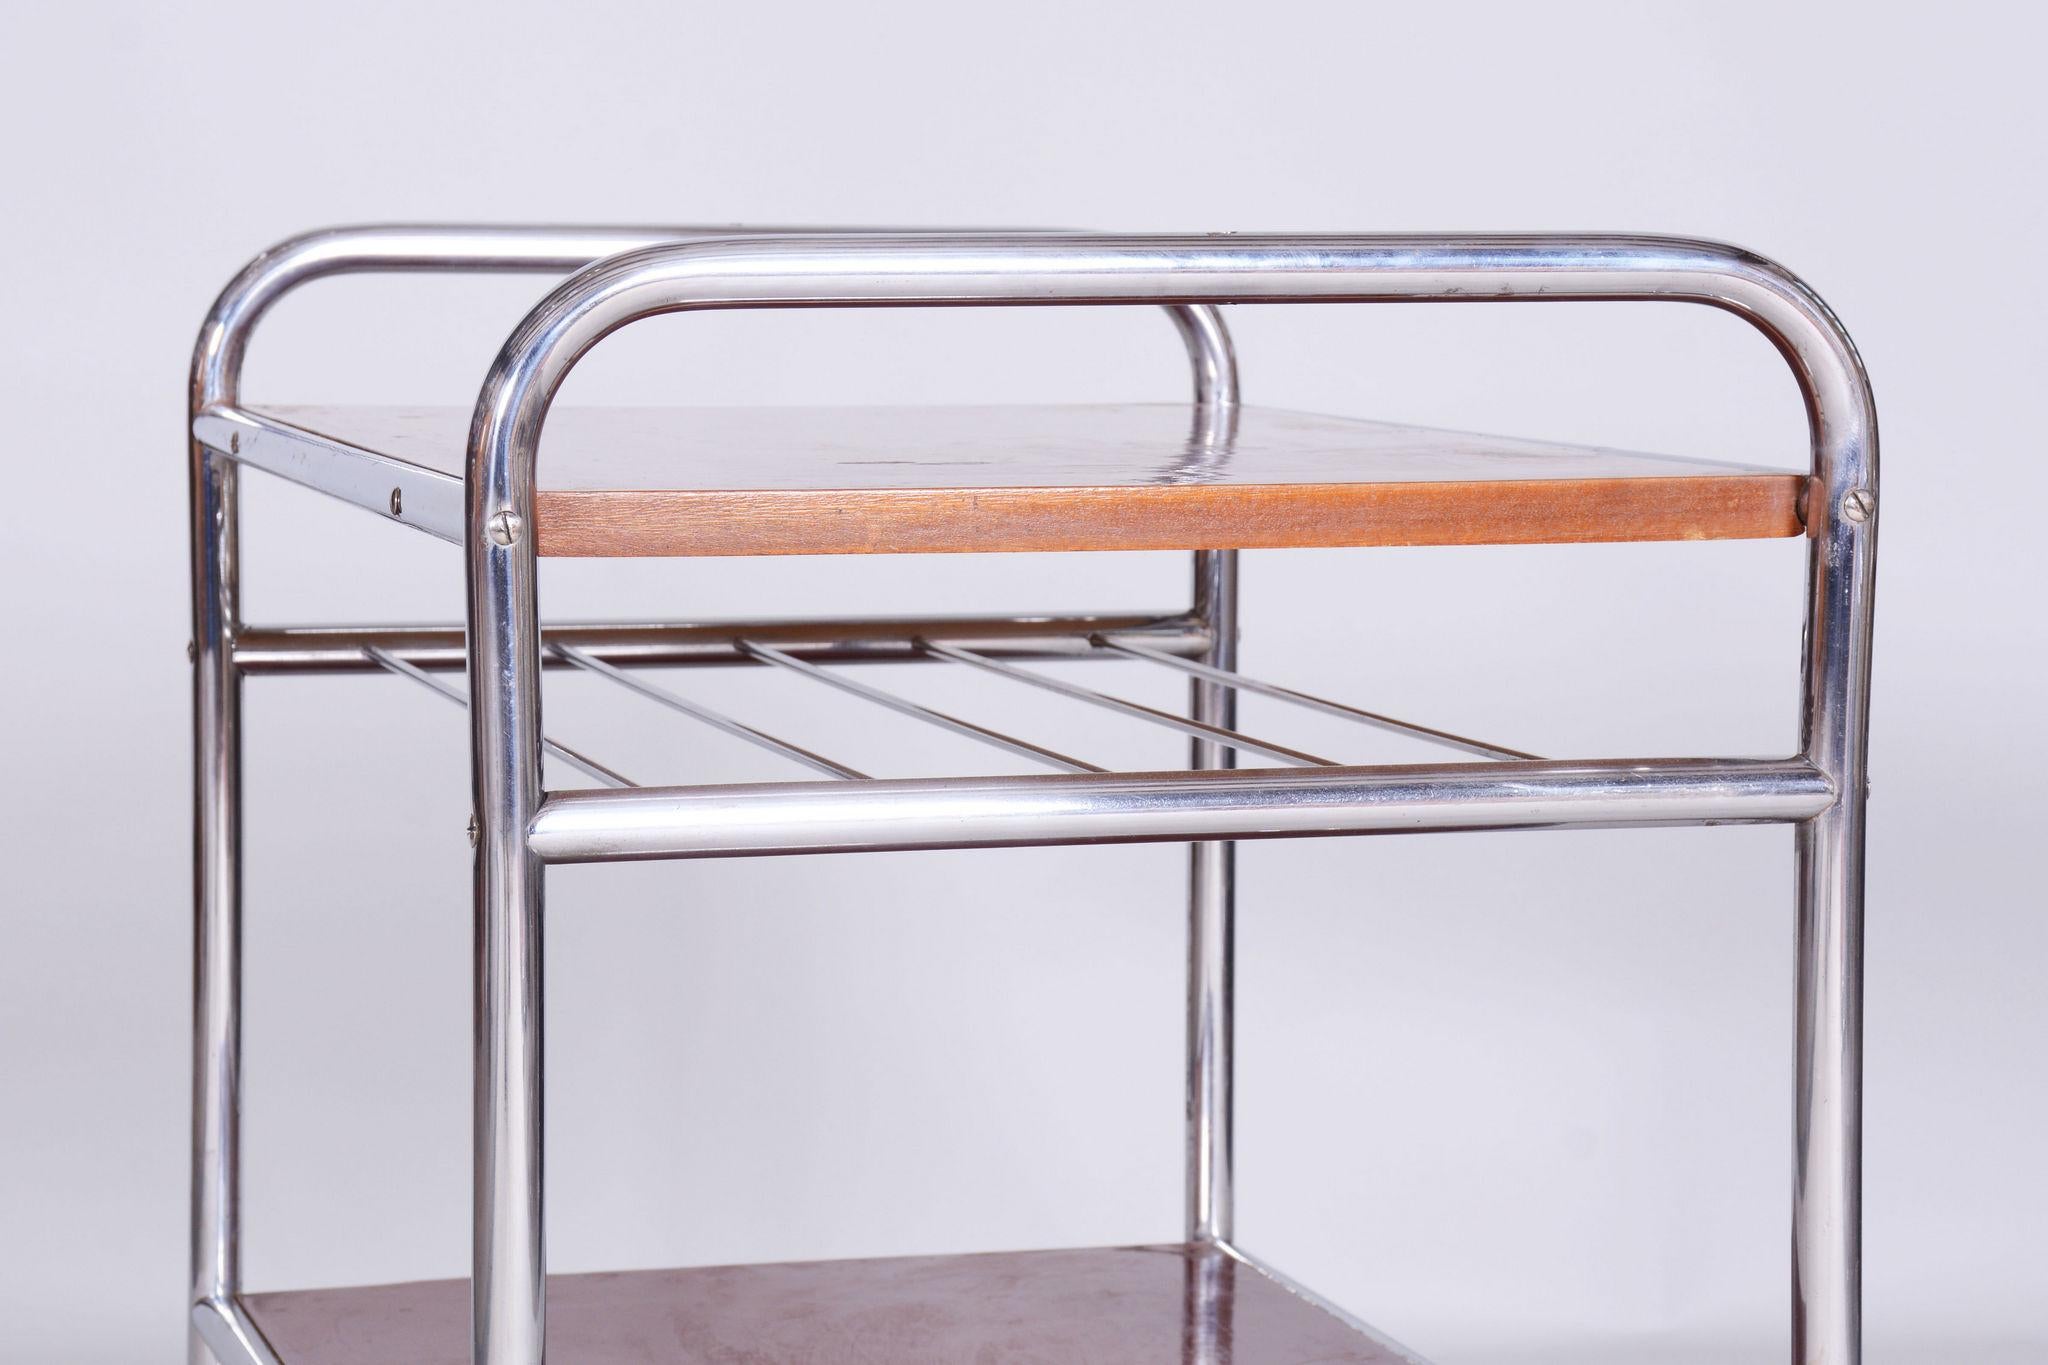 Original Bauhaus Side Table, Chrome-Plated Steel, Czechia, 1930s In Good Condition For Sale In Horomerice, CZ